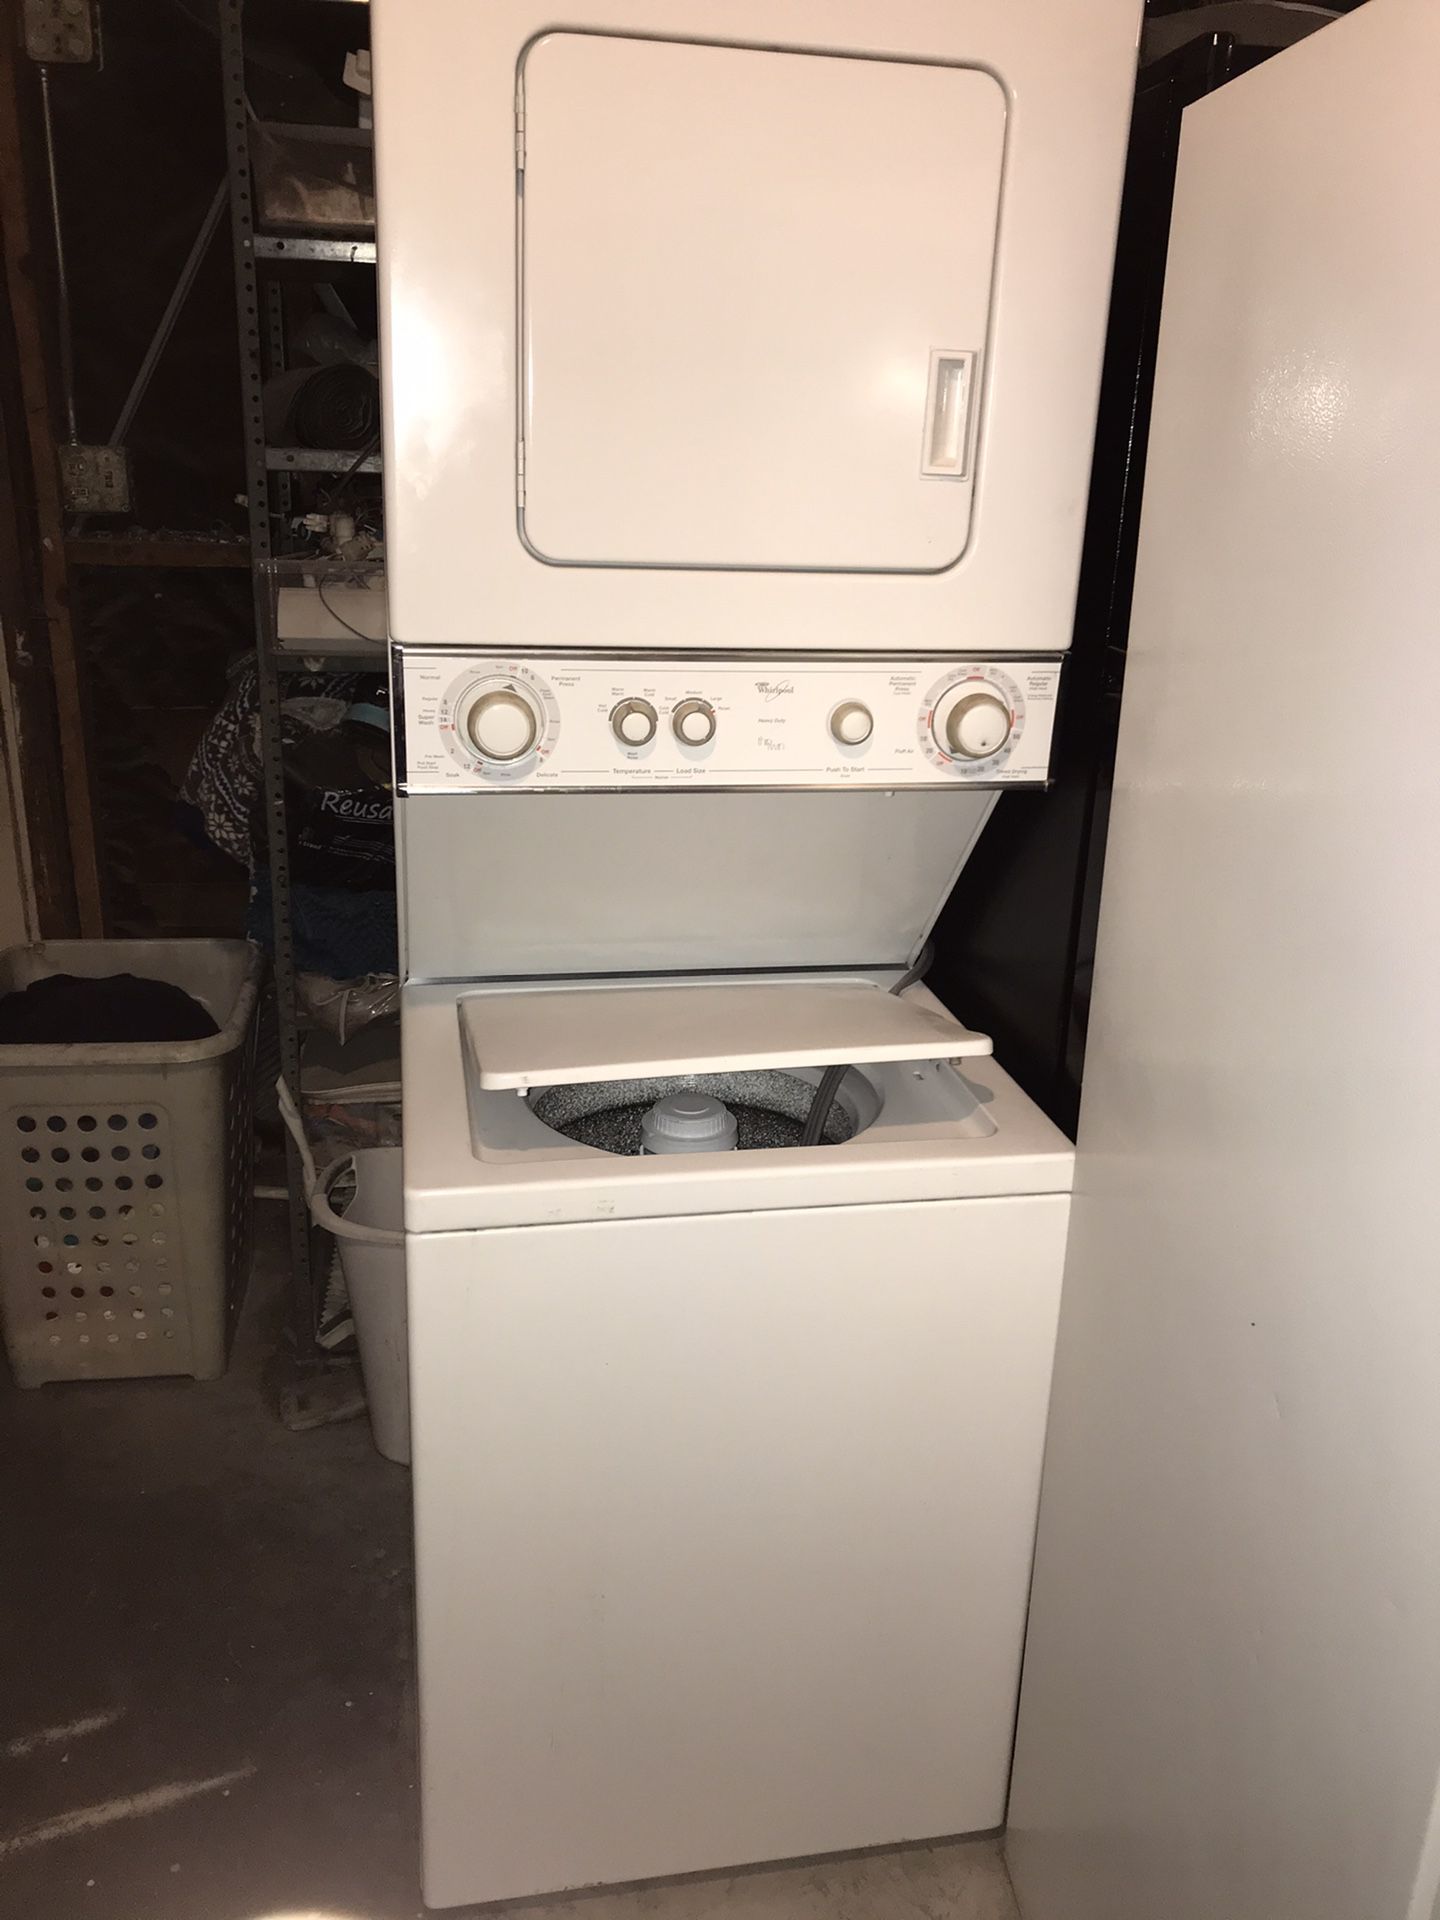 Whirlpool washer and dryer electric works perfectly